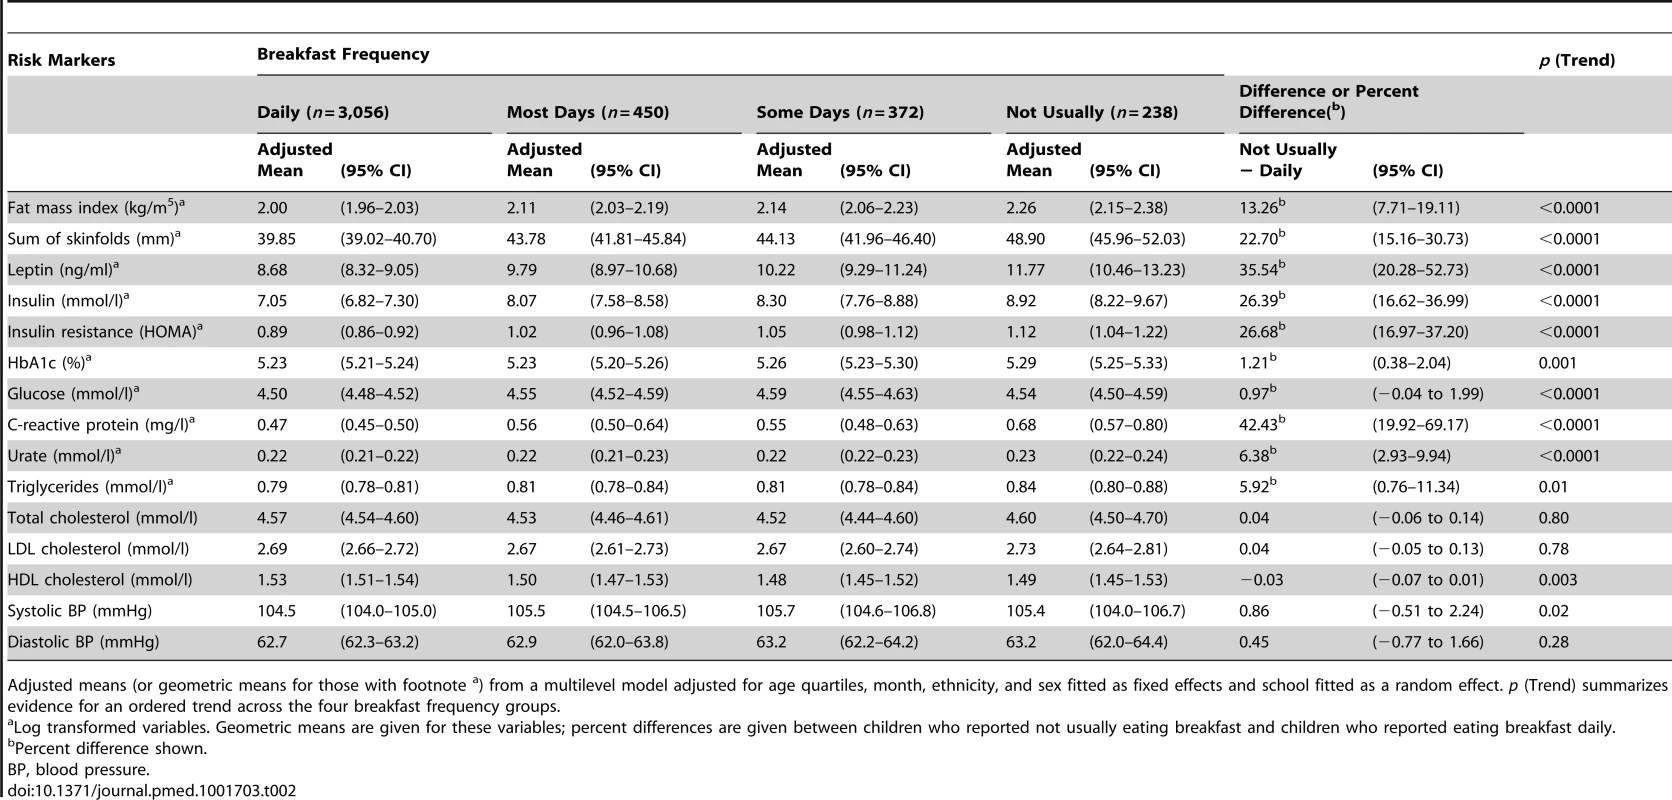 Means (geometric means) and differences (percent differences) in type 2 diabetes and cardiovascular risk markers by breakfast frequency in 4,116 study participants.